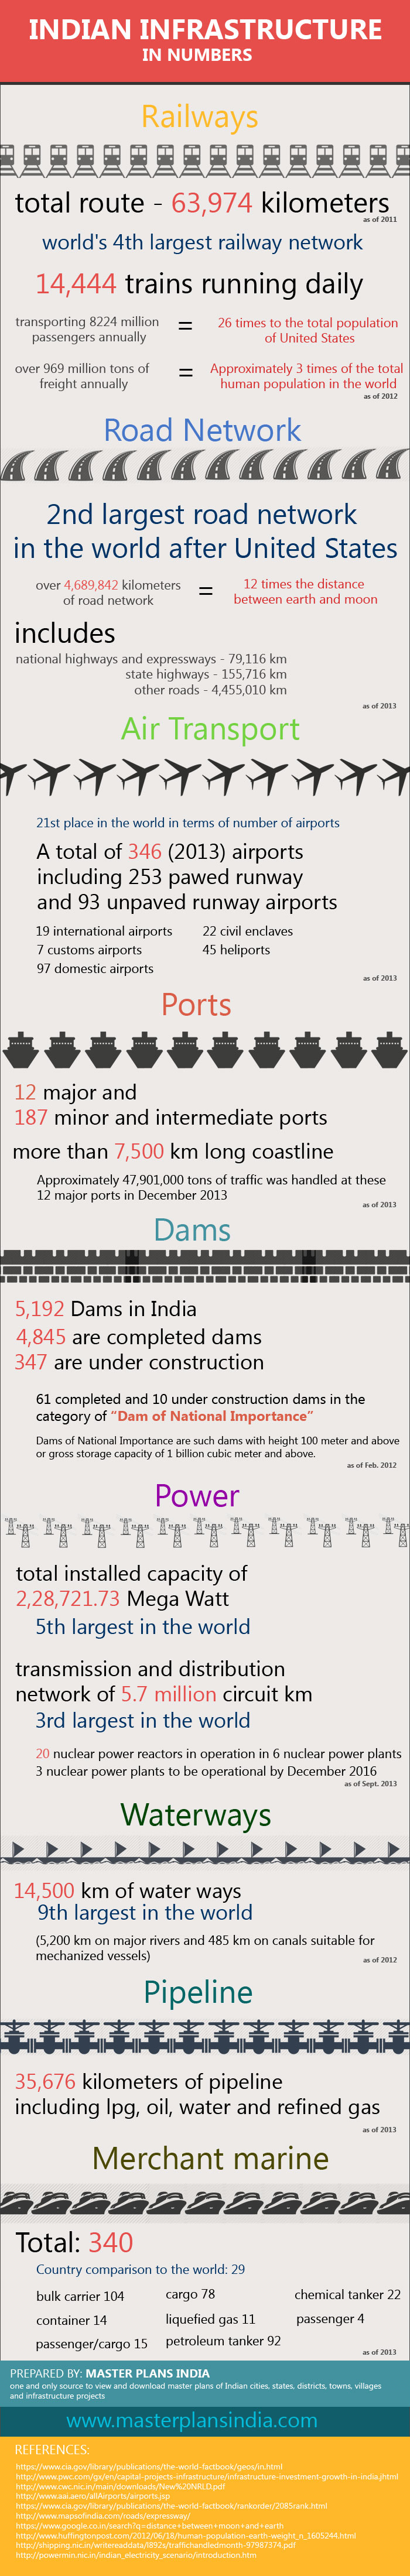 Indian Infrastructure in Numbers